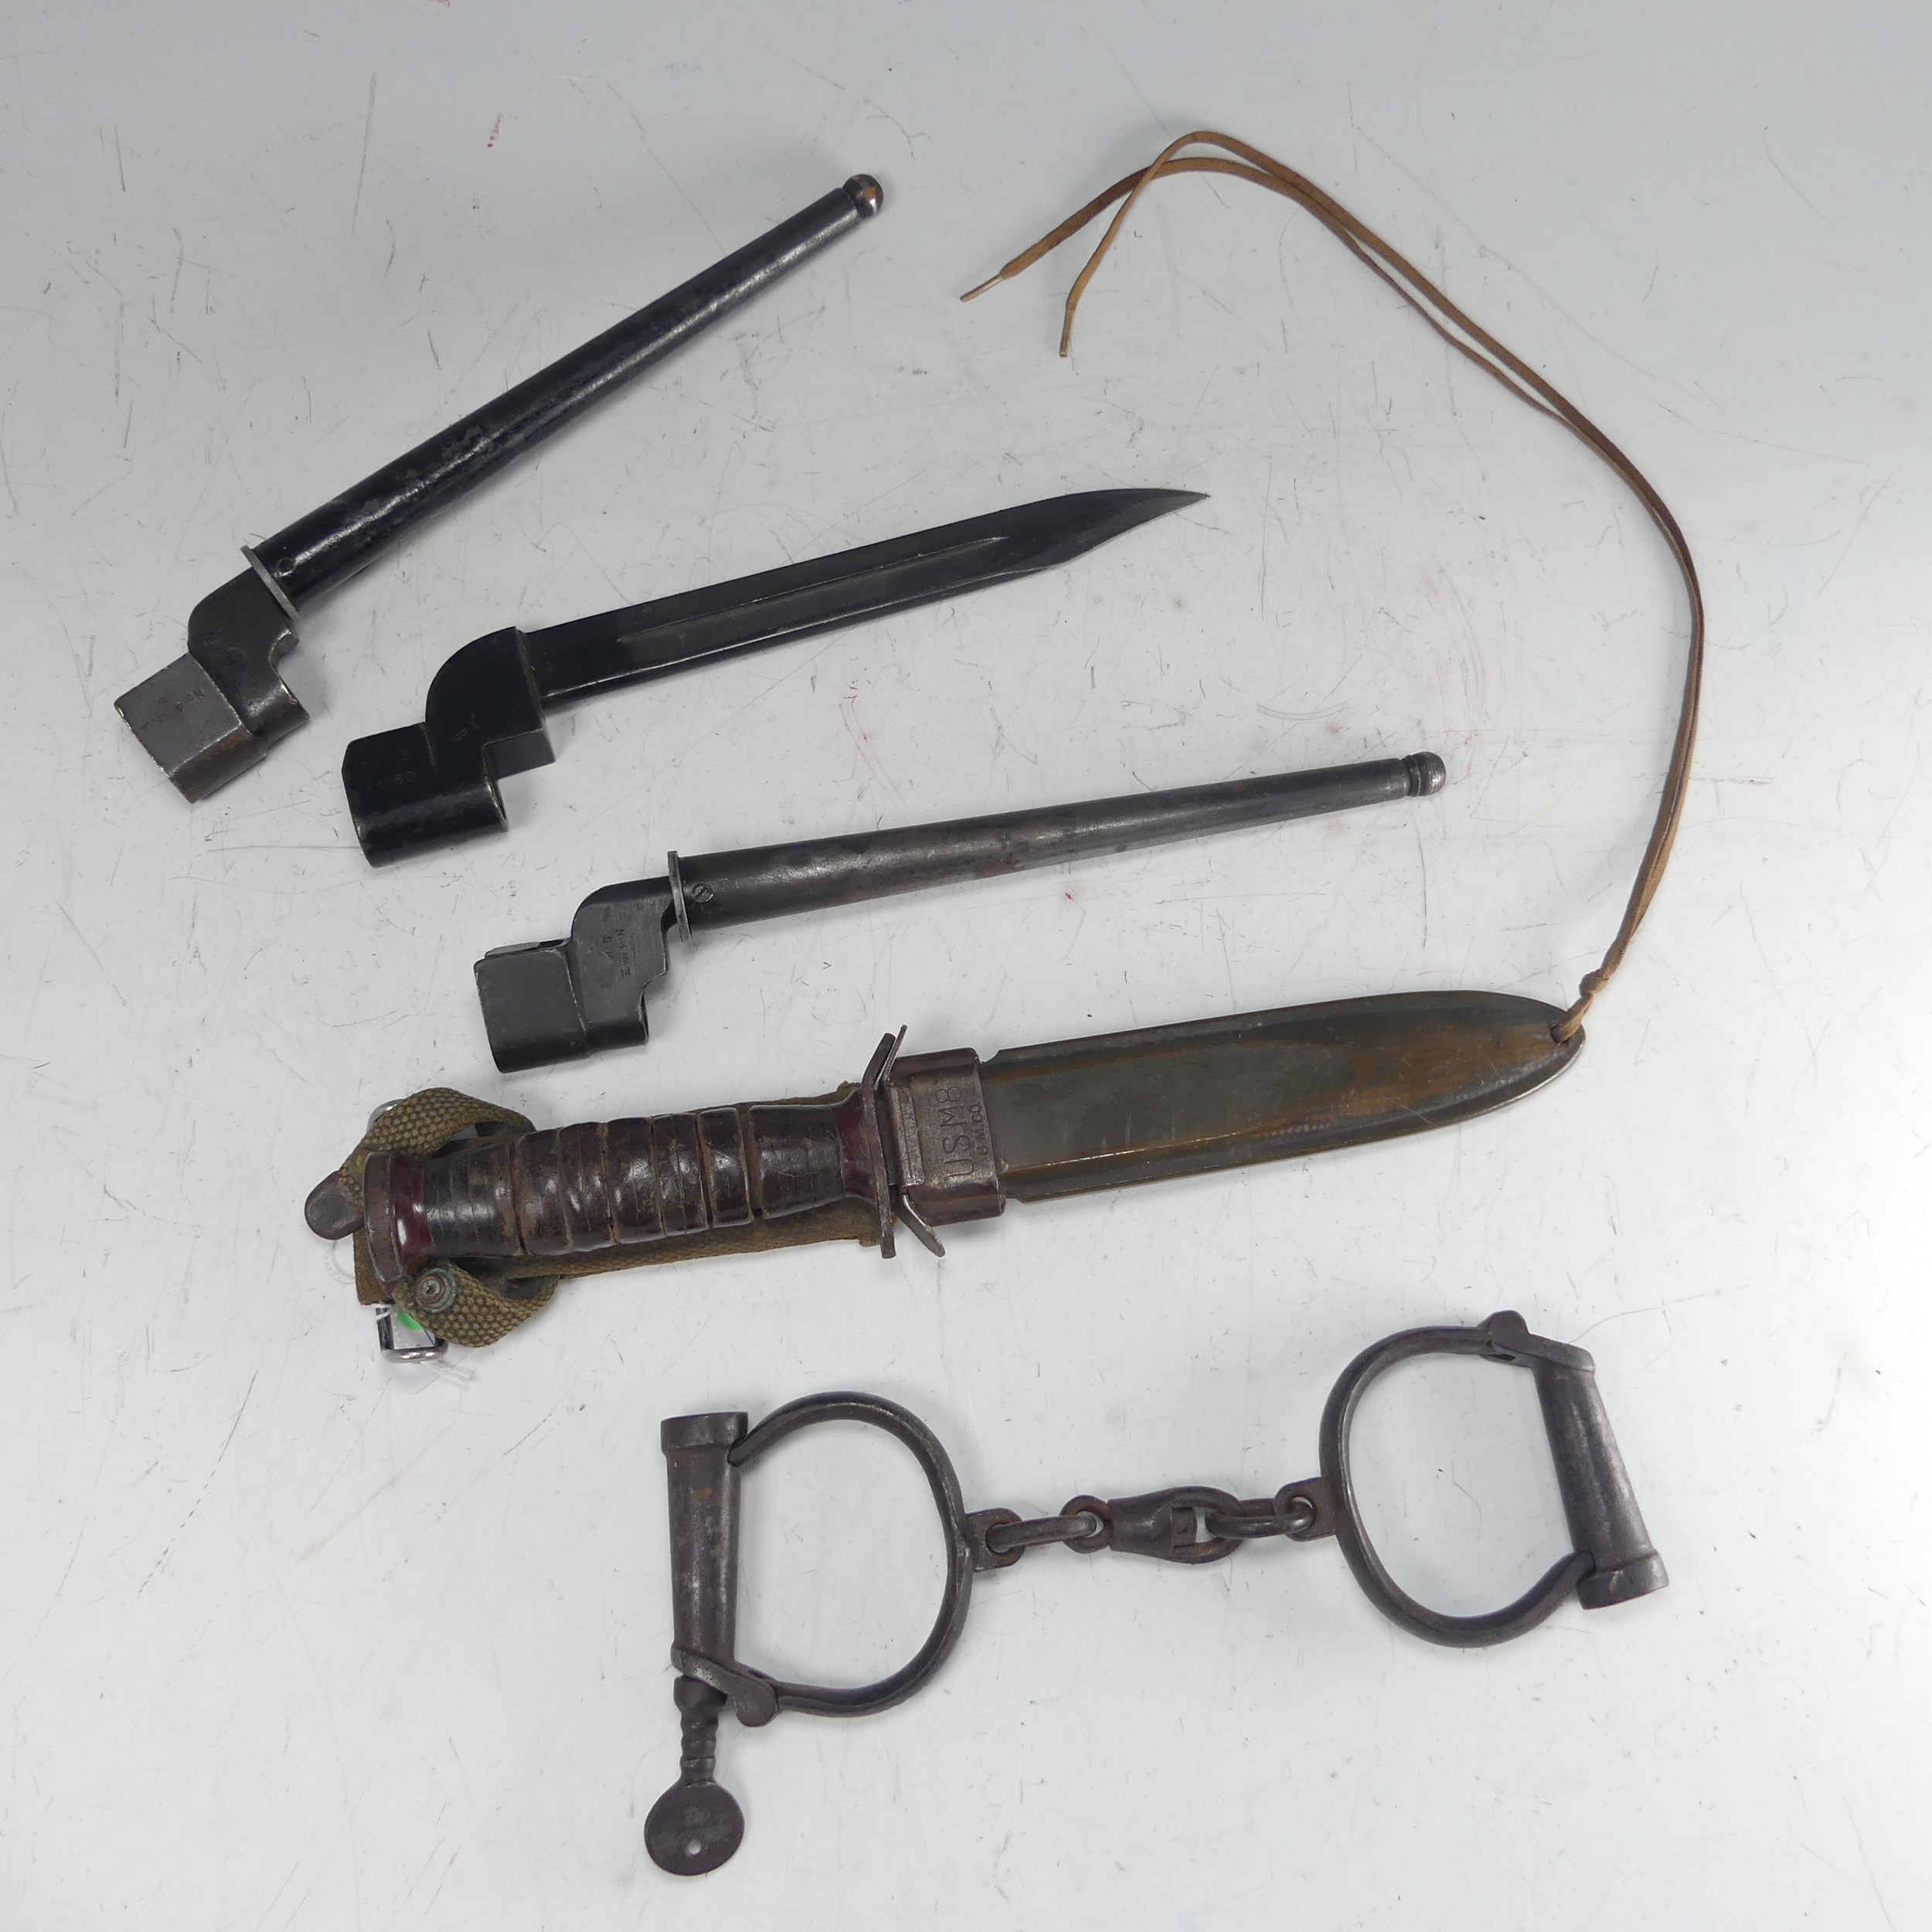 An American USM8 B.M.CO bayonet Knife, with scabbard and material fittings, together with three